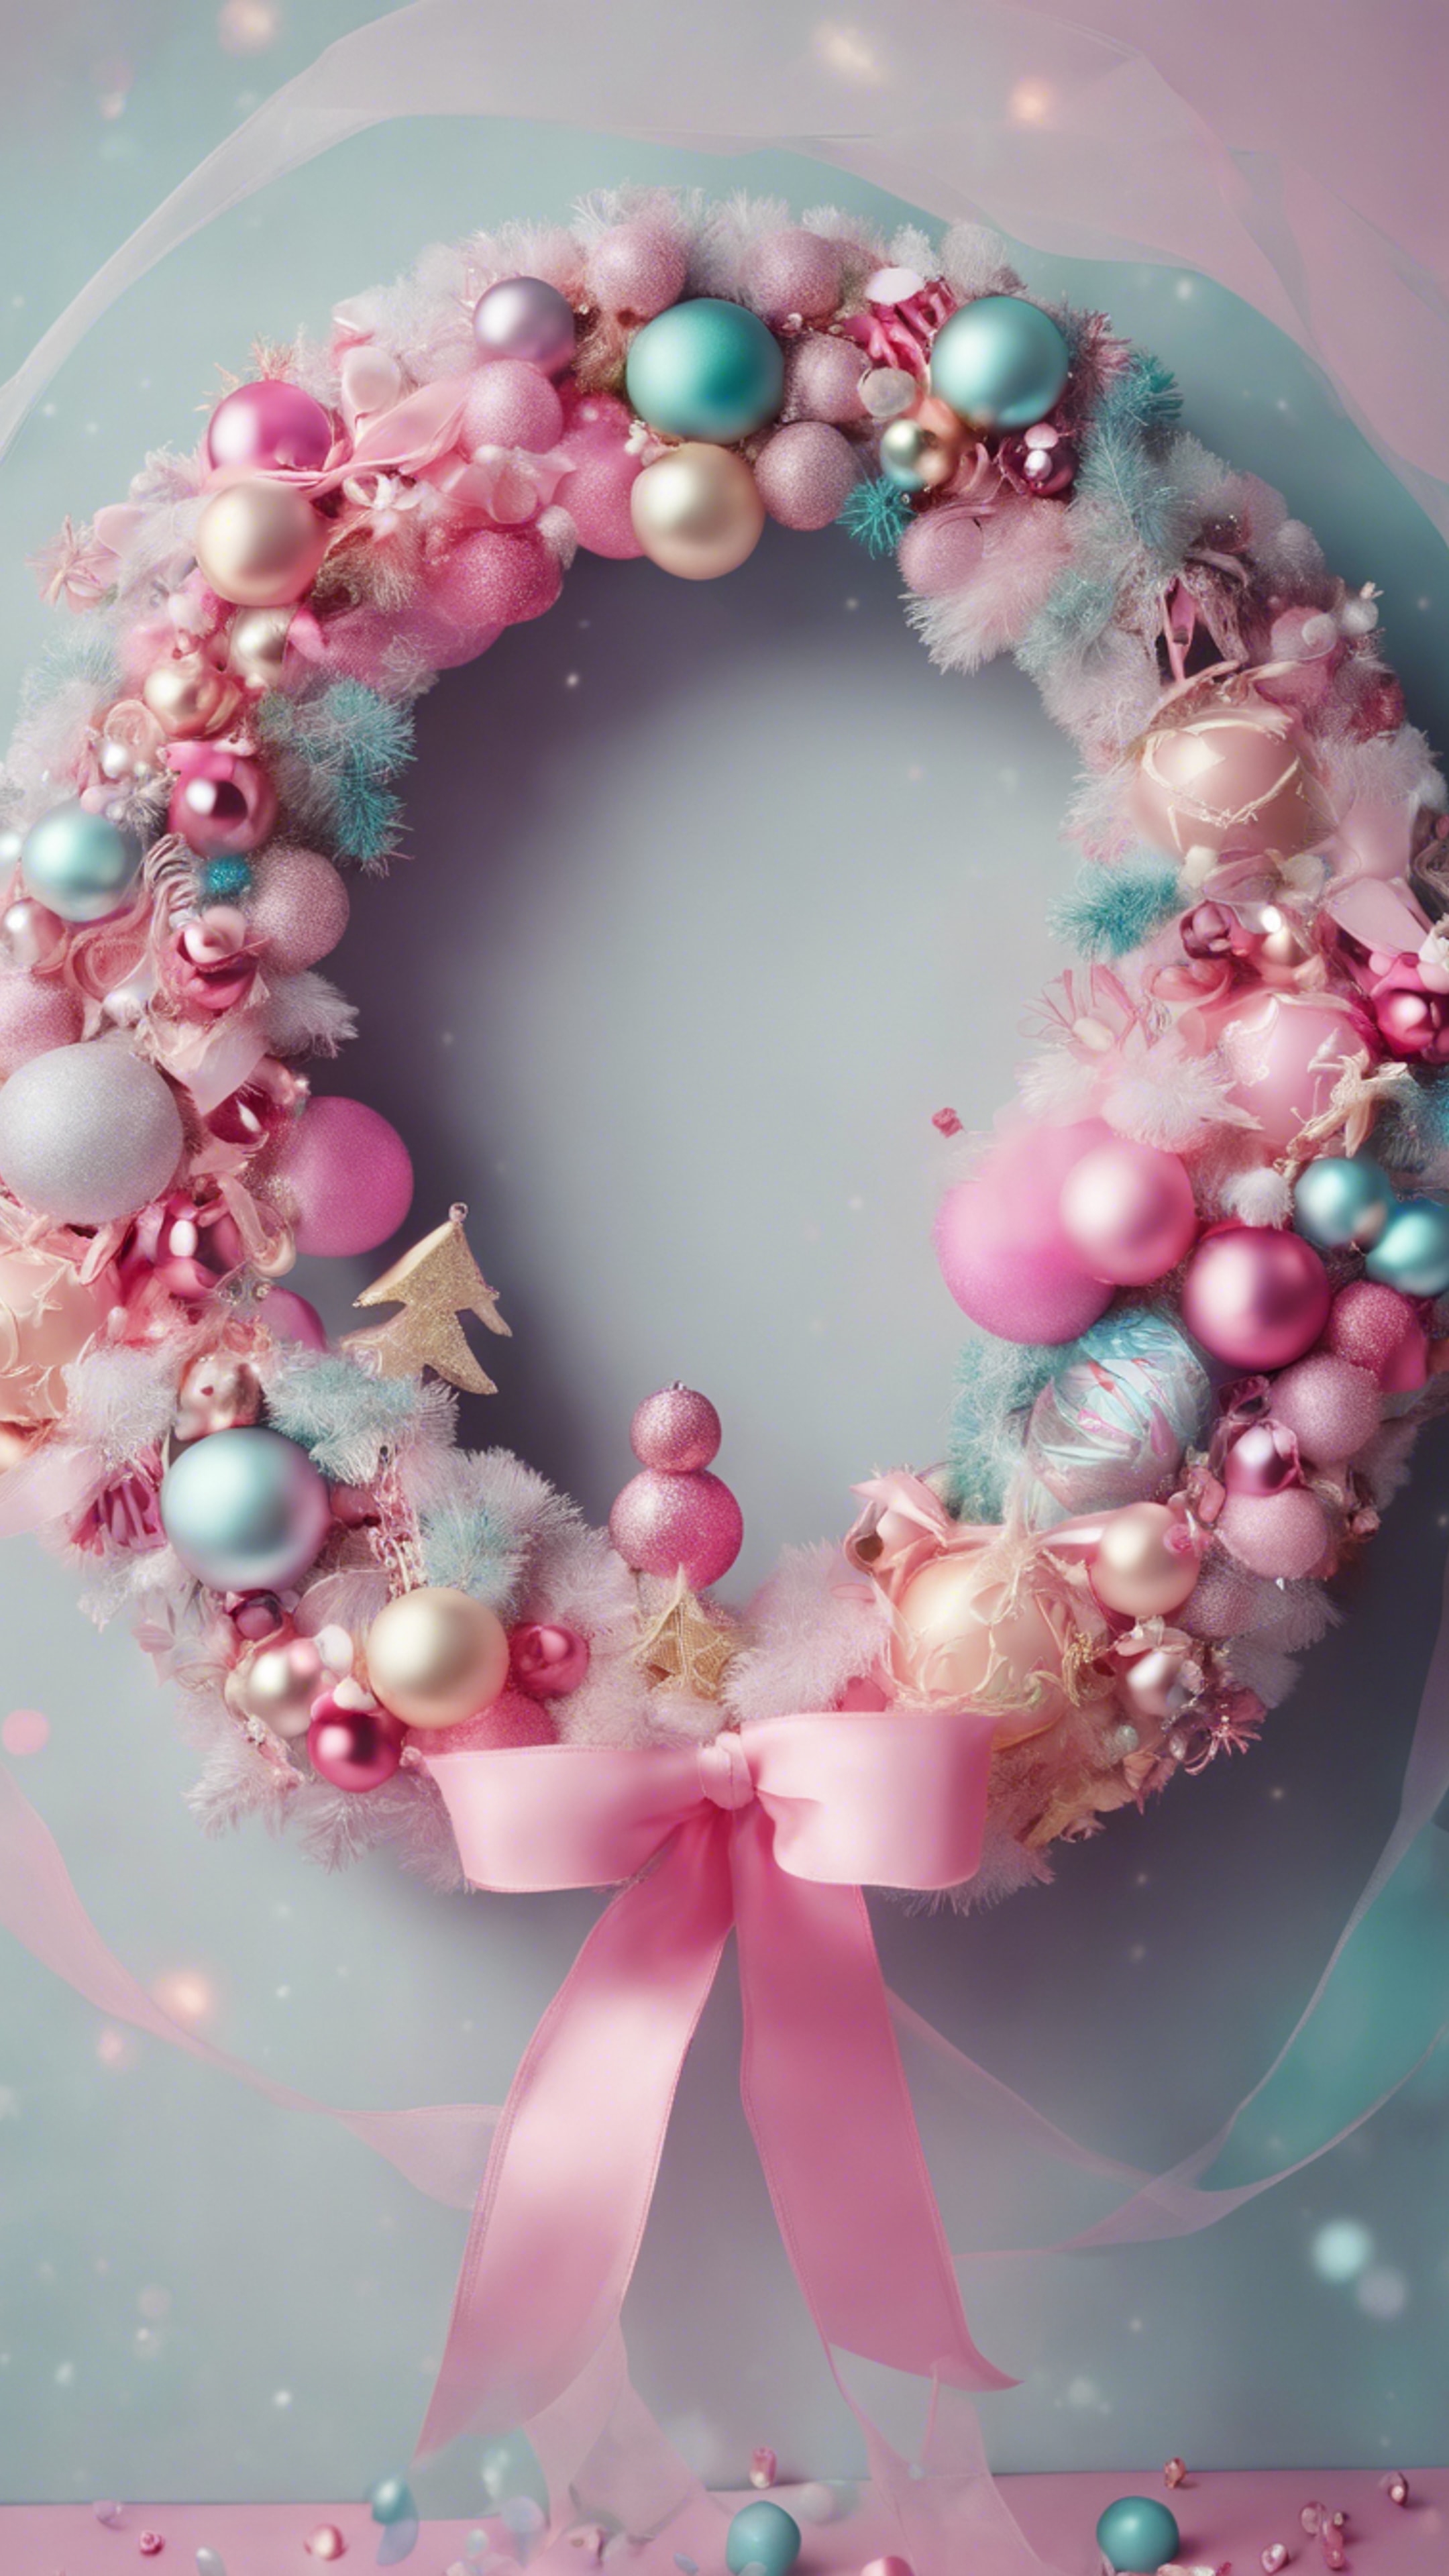 A Kawaii-inspired Christmas wreath adorned with bright pink and pastel ribbons and cute festive ornaments. Валлпапер[4ef6f99b659d4f218ce6]